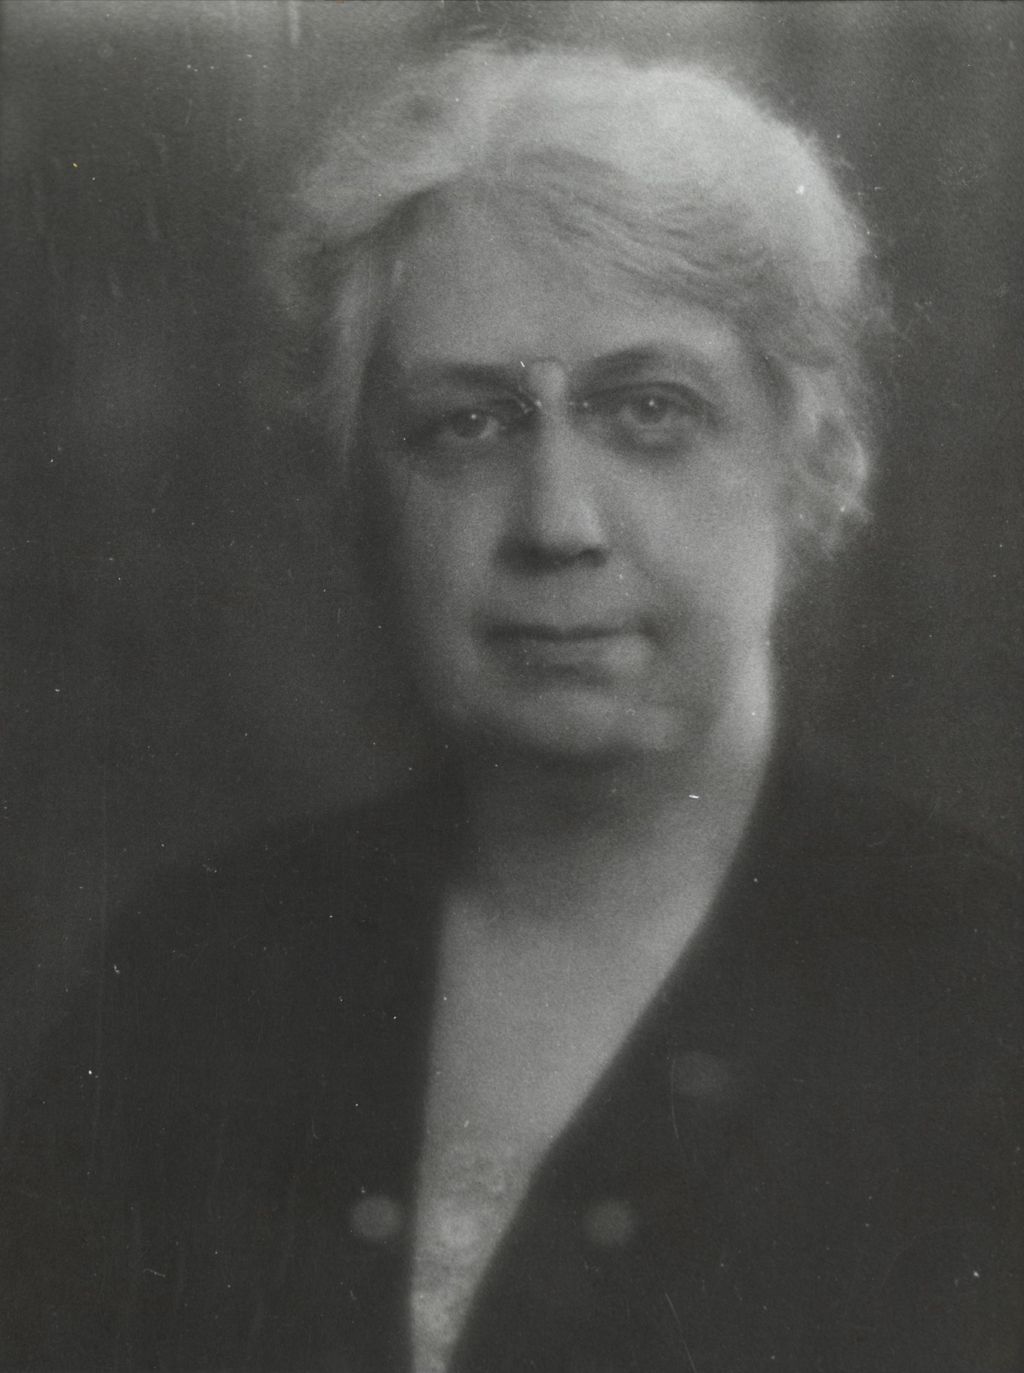 Miniature of Hull-House Music School director Gertrude Smith